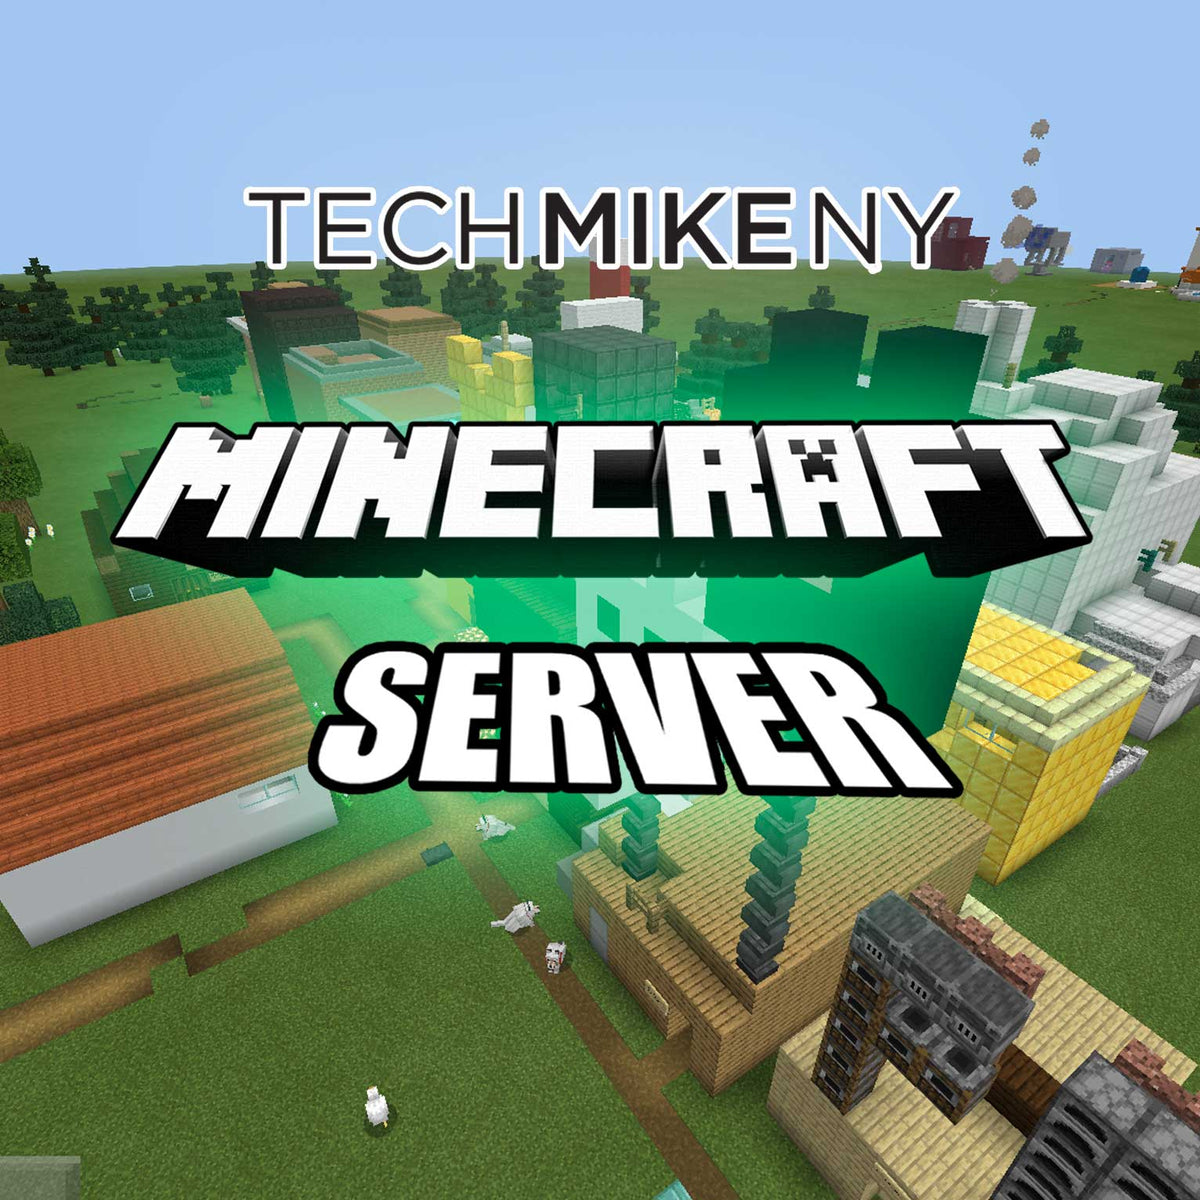 Minecraft CPU is powerful enough to play Minecraft